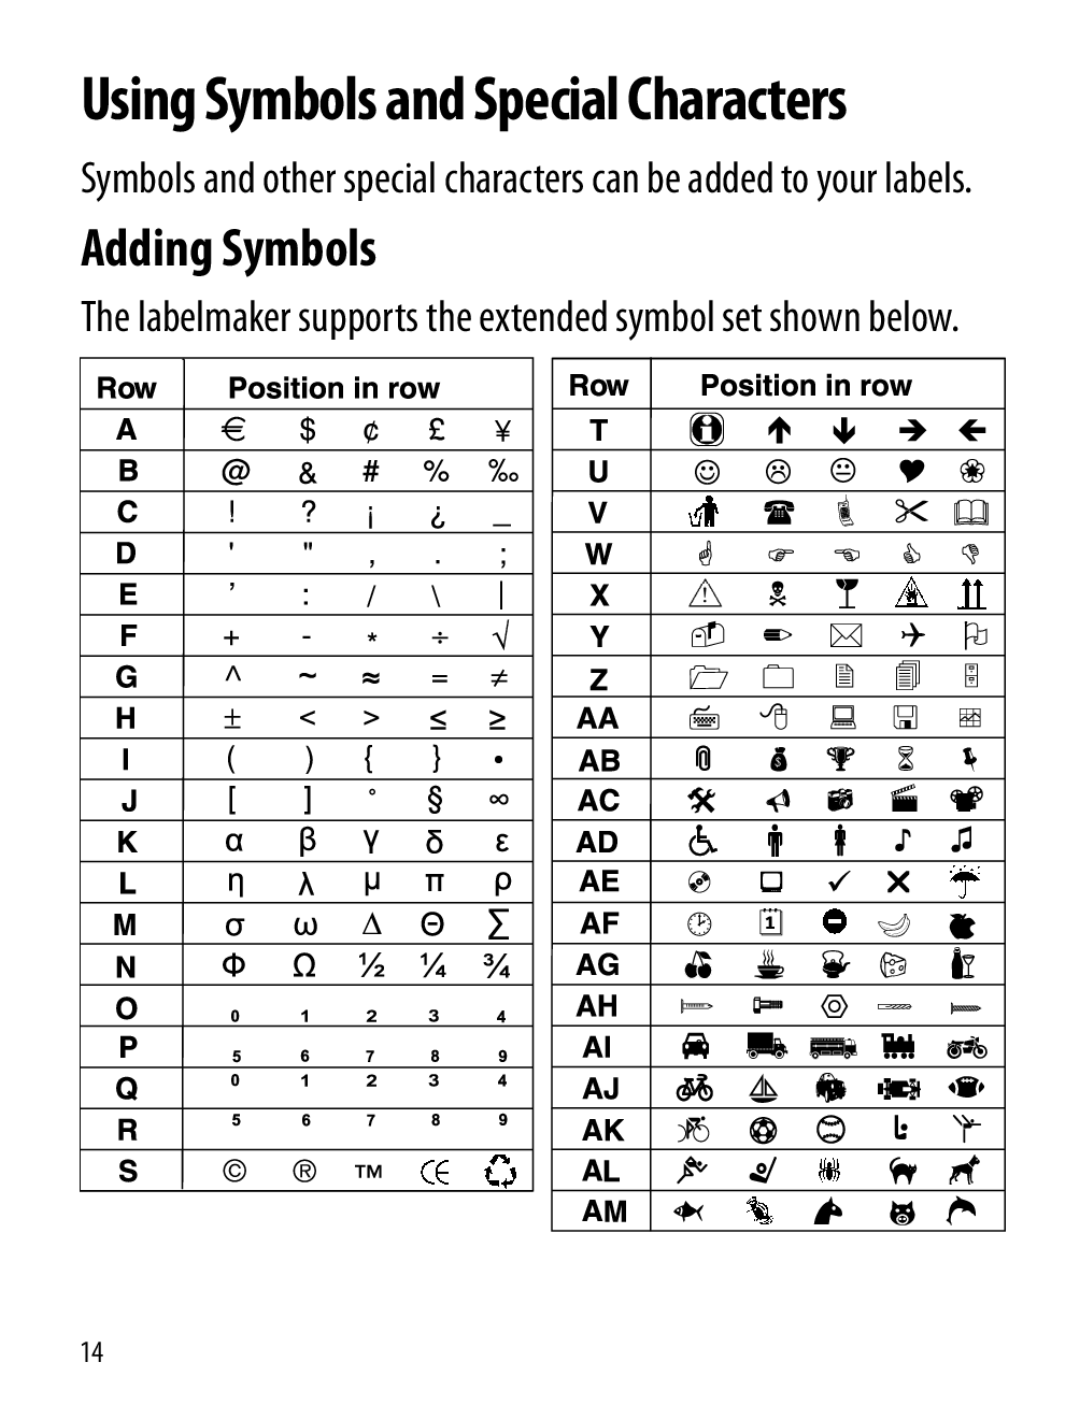 Dymo Labelmaker manual Using Symbols and Special Characters, Adding Symbols 